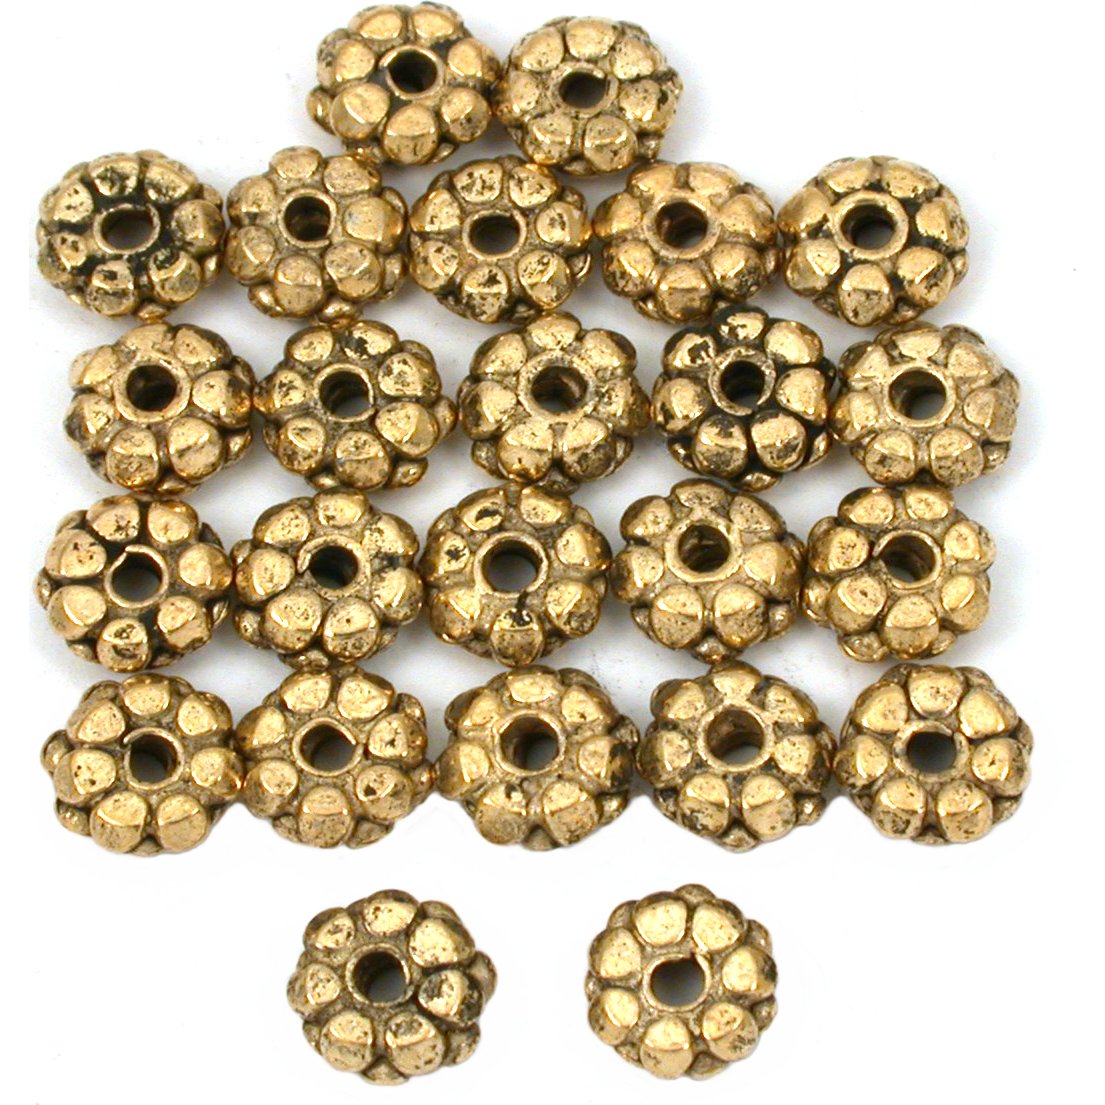 Bali Spacer Flower Antique Gold Plated Beads 7.5mm 15 Grams 20Pcs Approx.